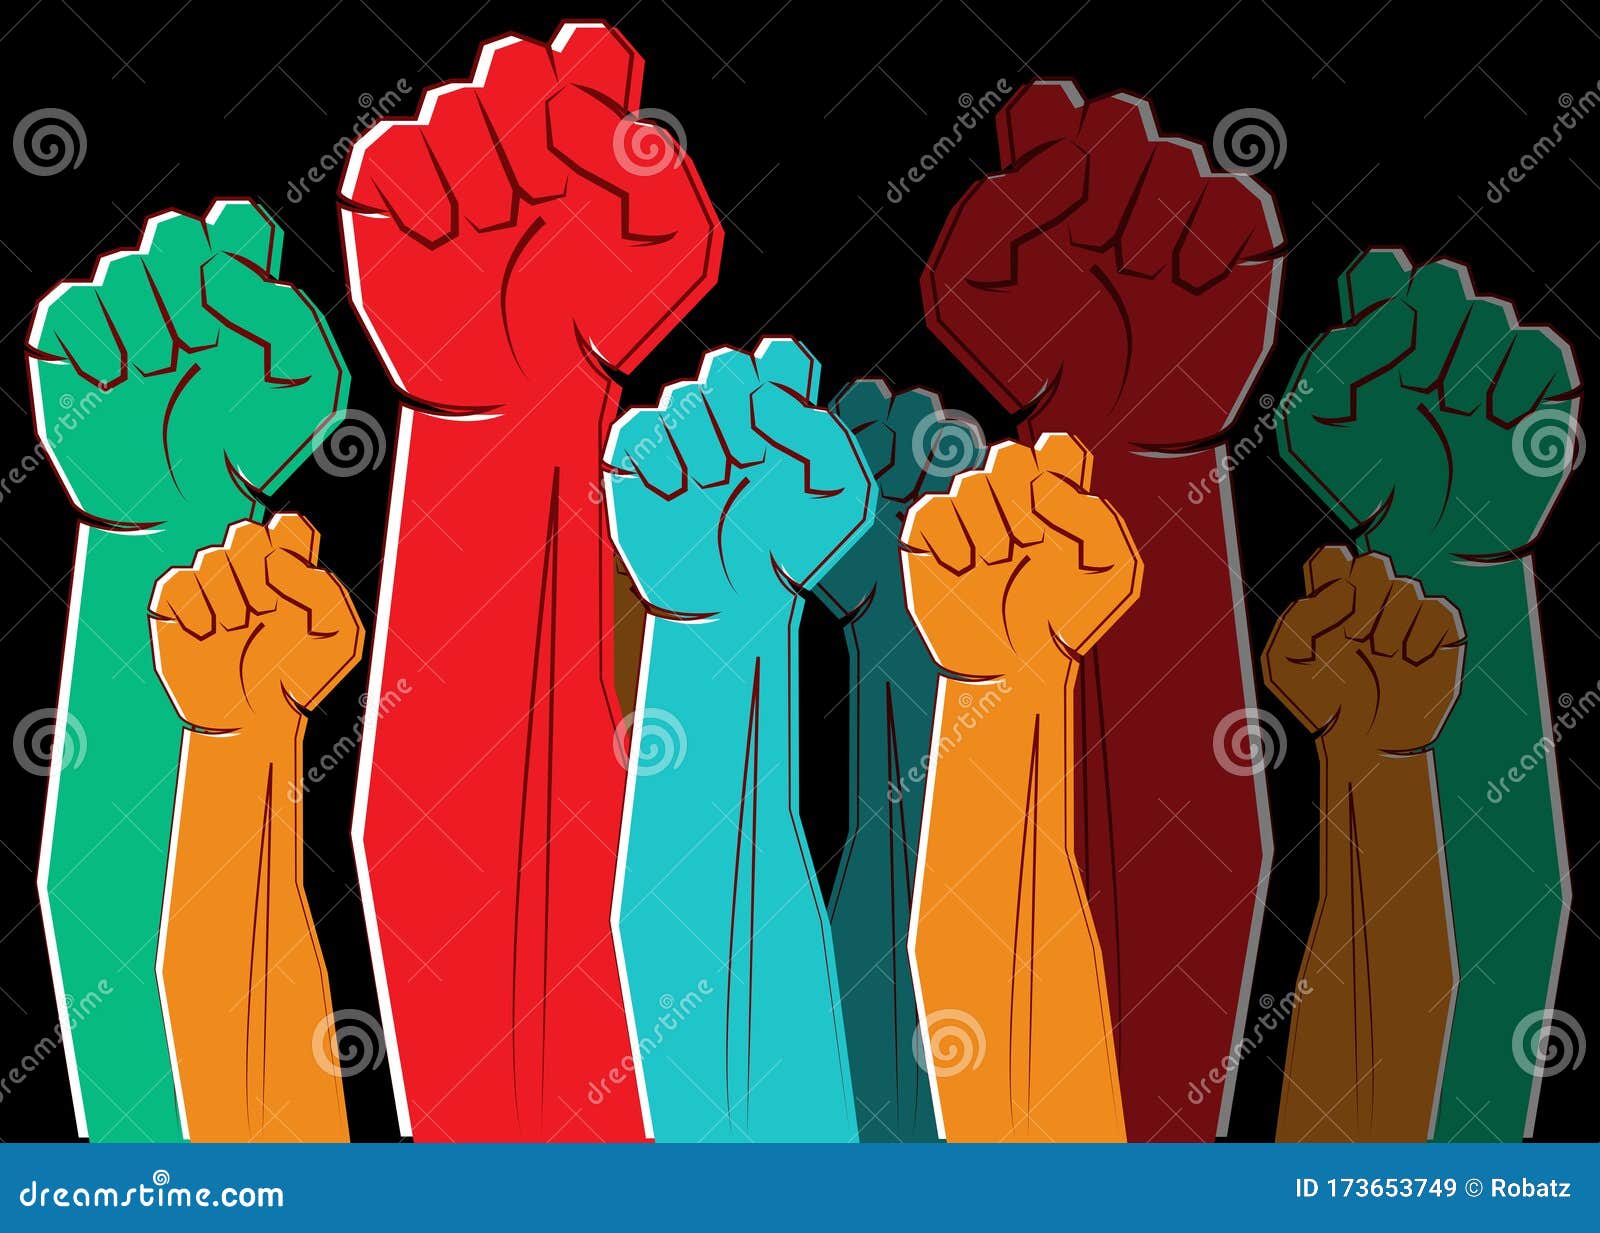 colorful clenched fists hands raised in the air. protest, strength, freedom, revolution, rebel, revolt concept  